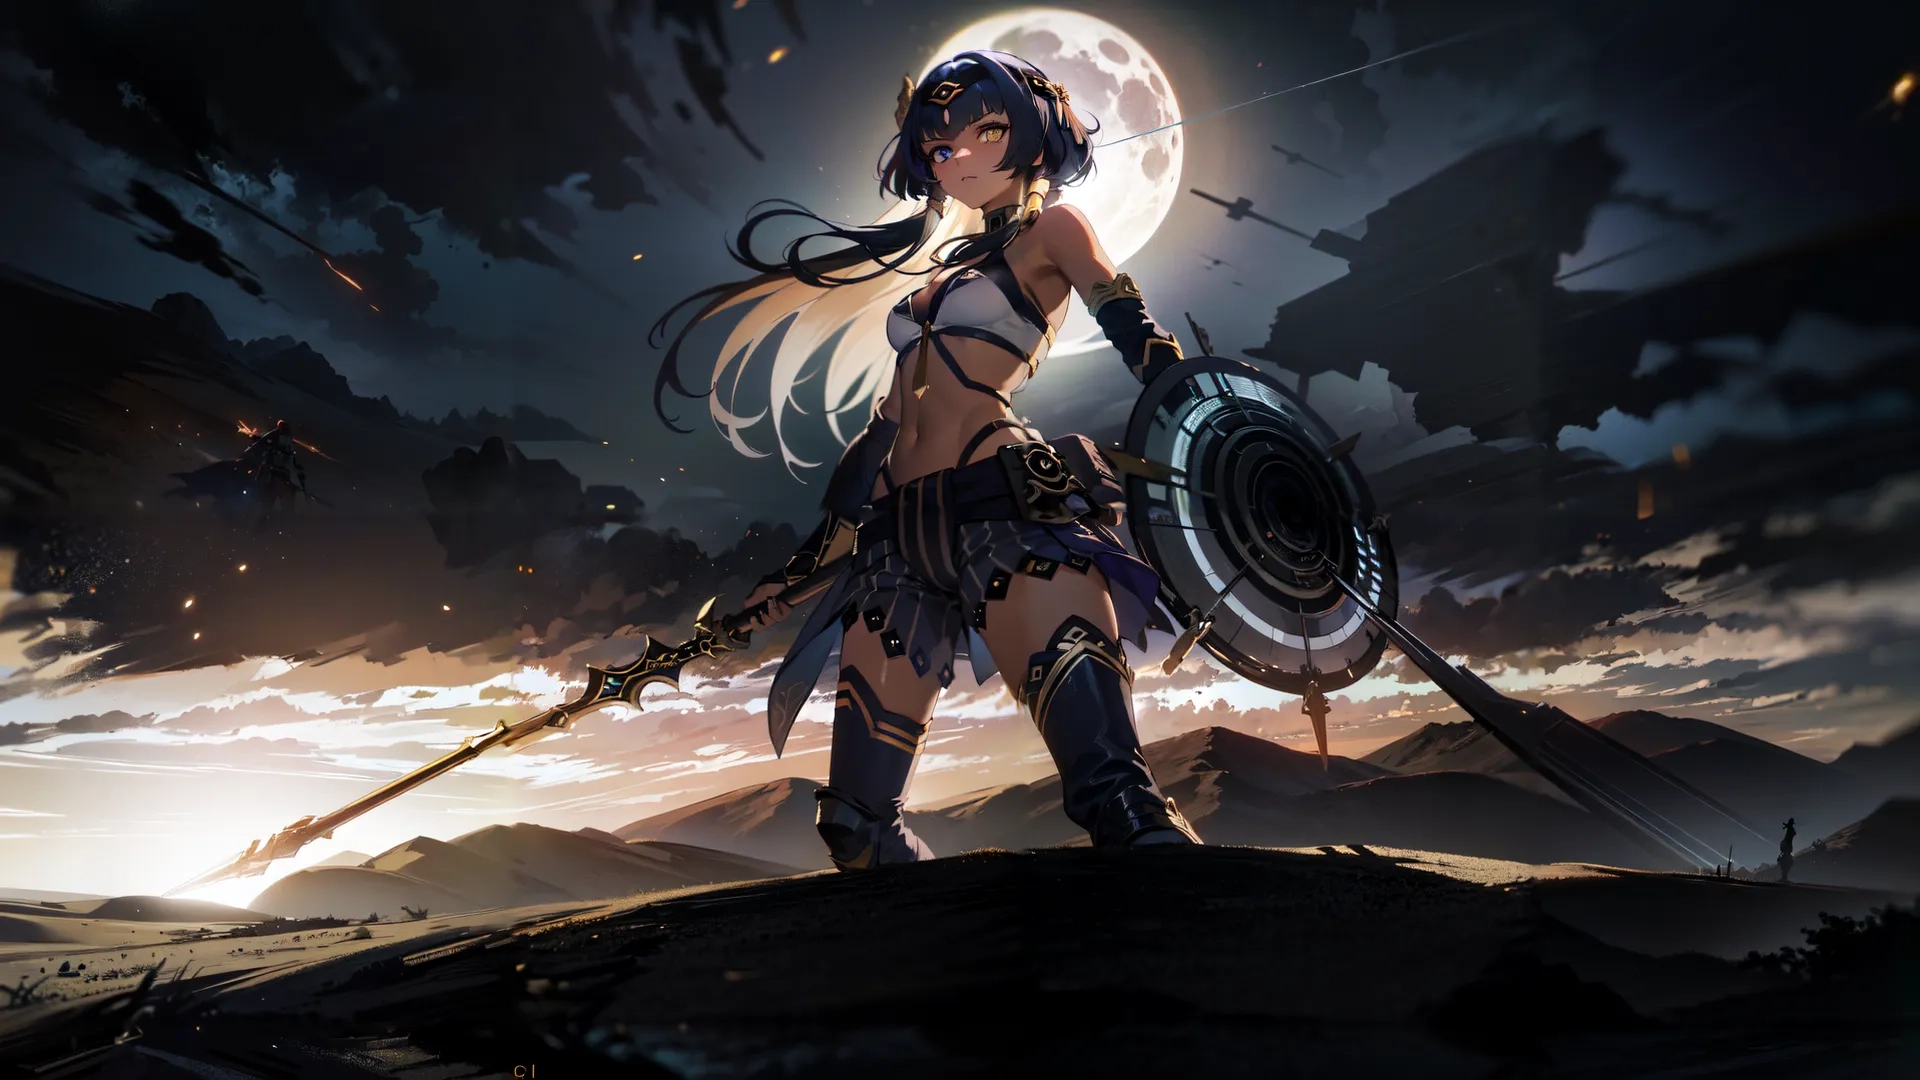 this woman warrior is holding a sword at sunset by the desert with an moon in the background and a full - moon and mountains are behind her
